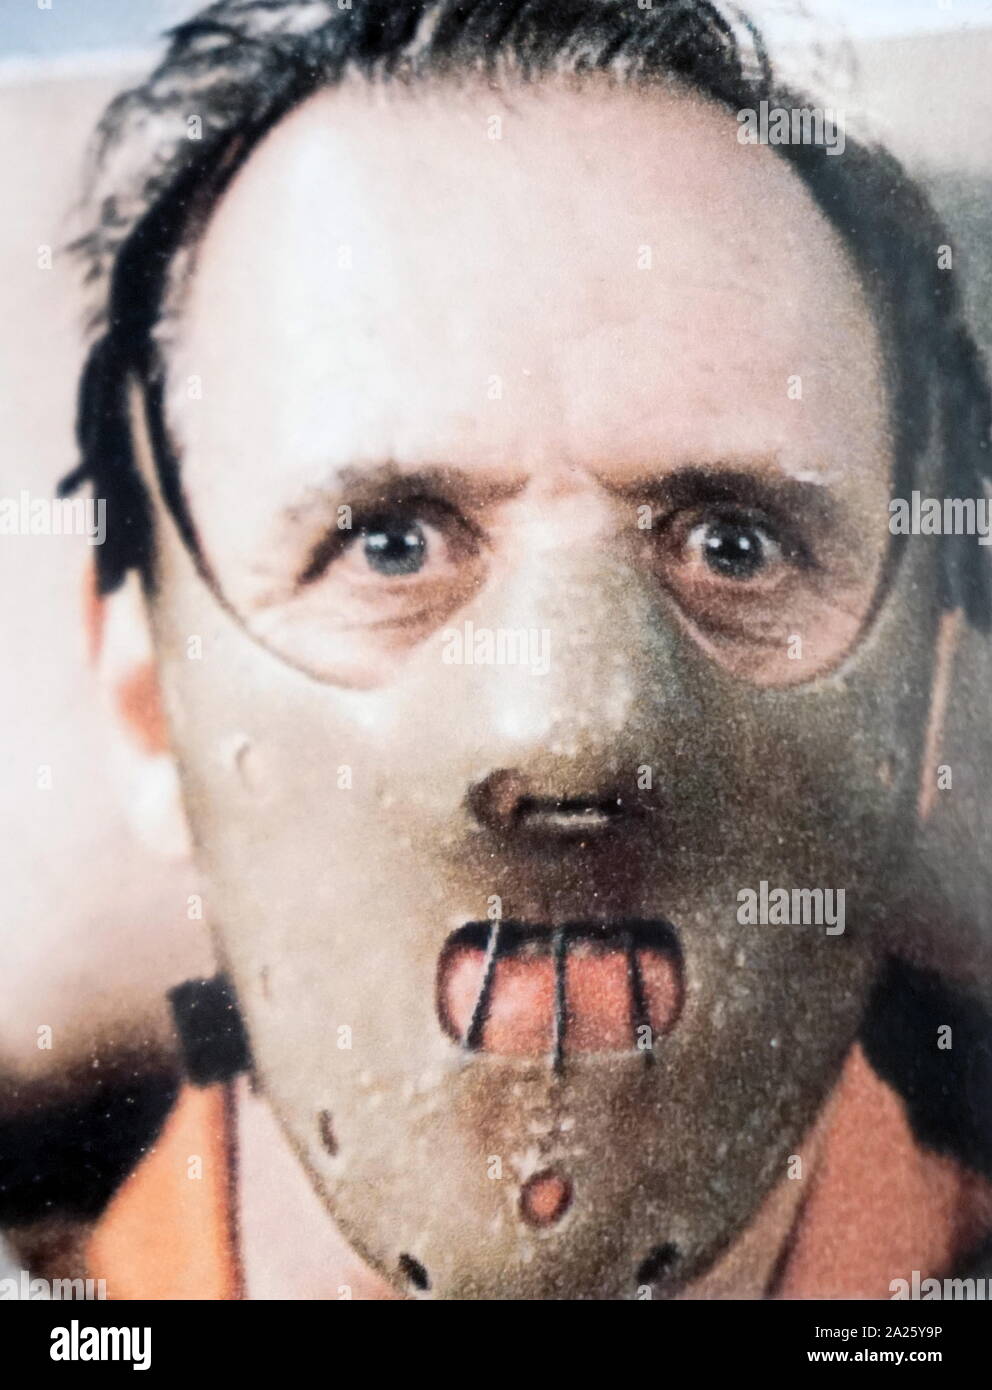 Photograph of Anthony Hopkins as Hannibal Lecter in Silence of the Lambs. Sir Philip Anthony Hopkins CBE (1937-) a Welsh actor, director, and producer. Stock Photo